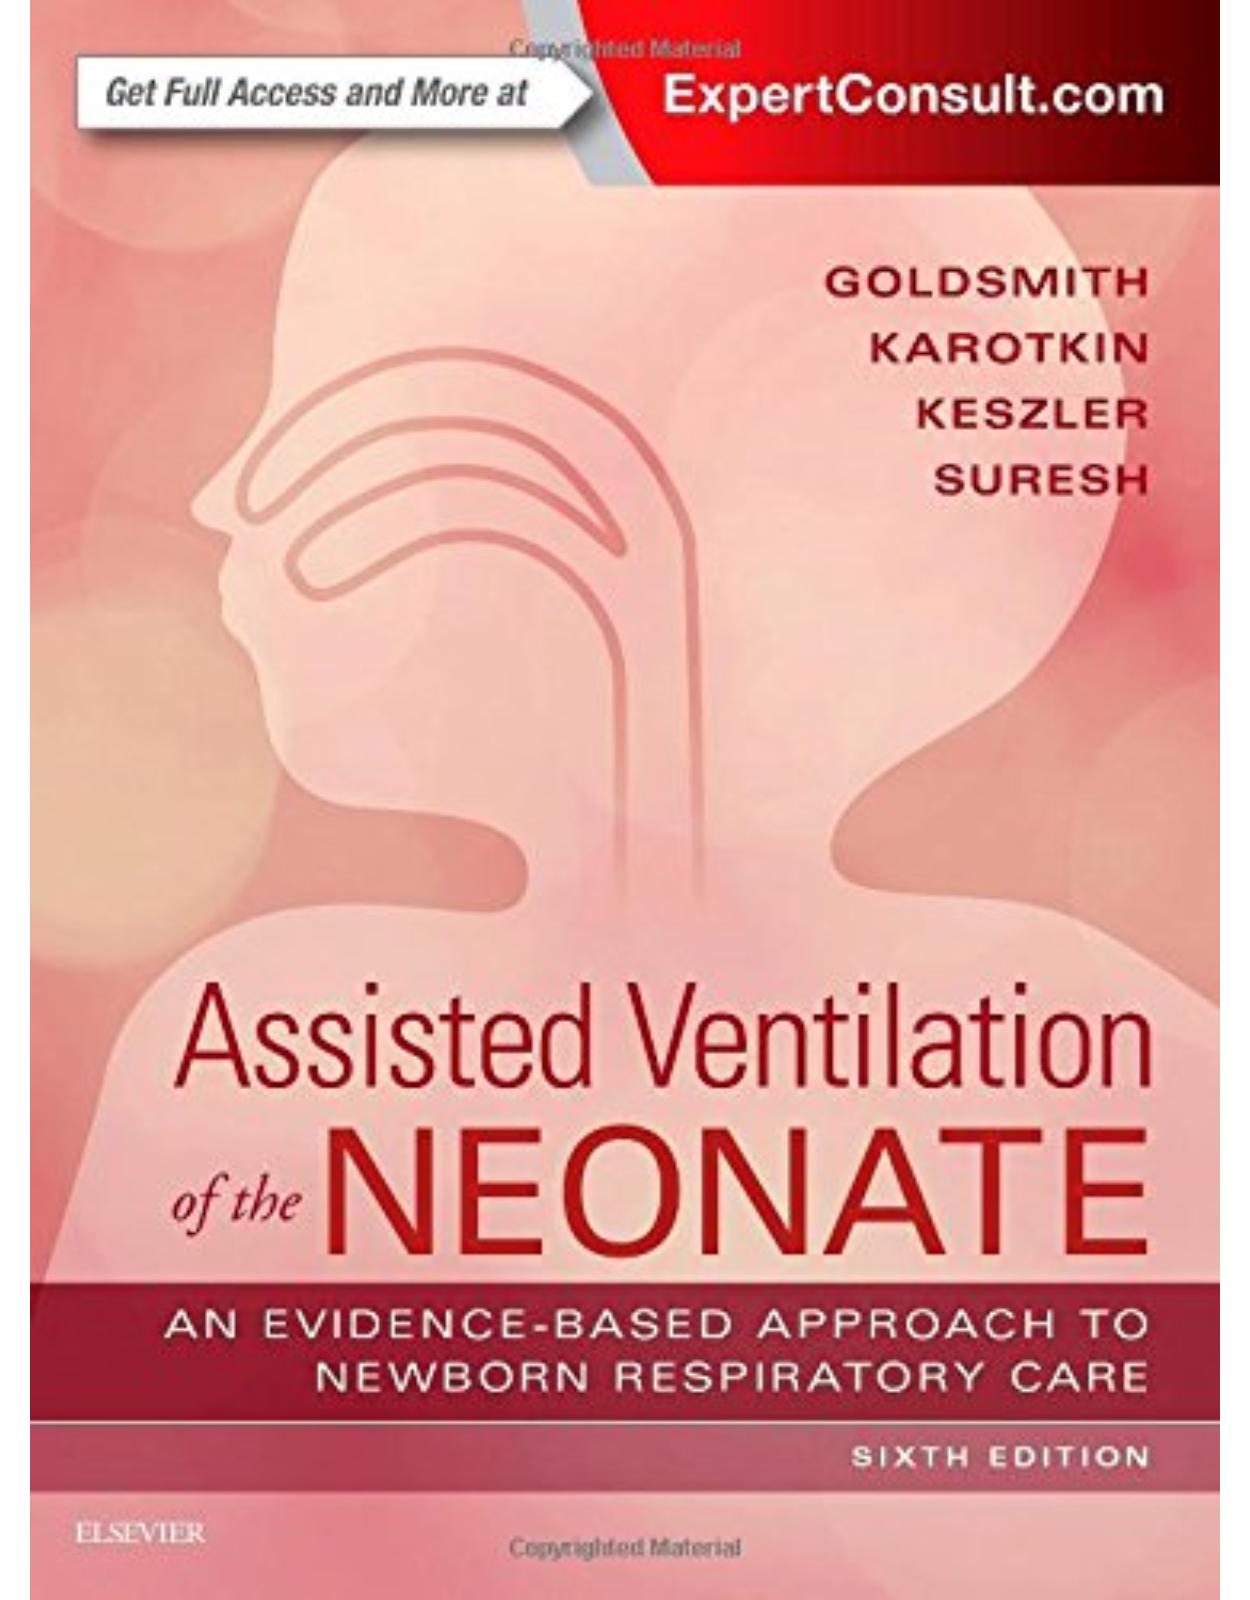 Assisted Ventilation of the Neonate, 6th Edition 